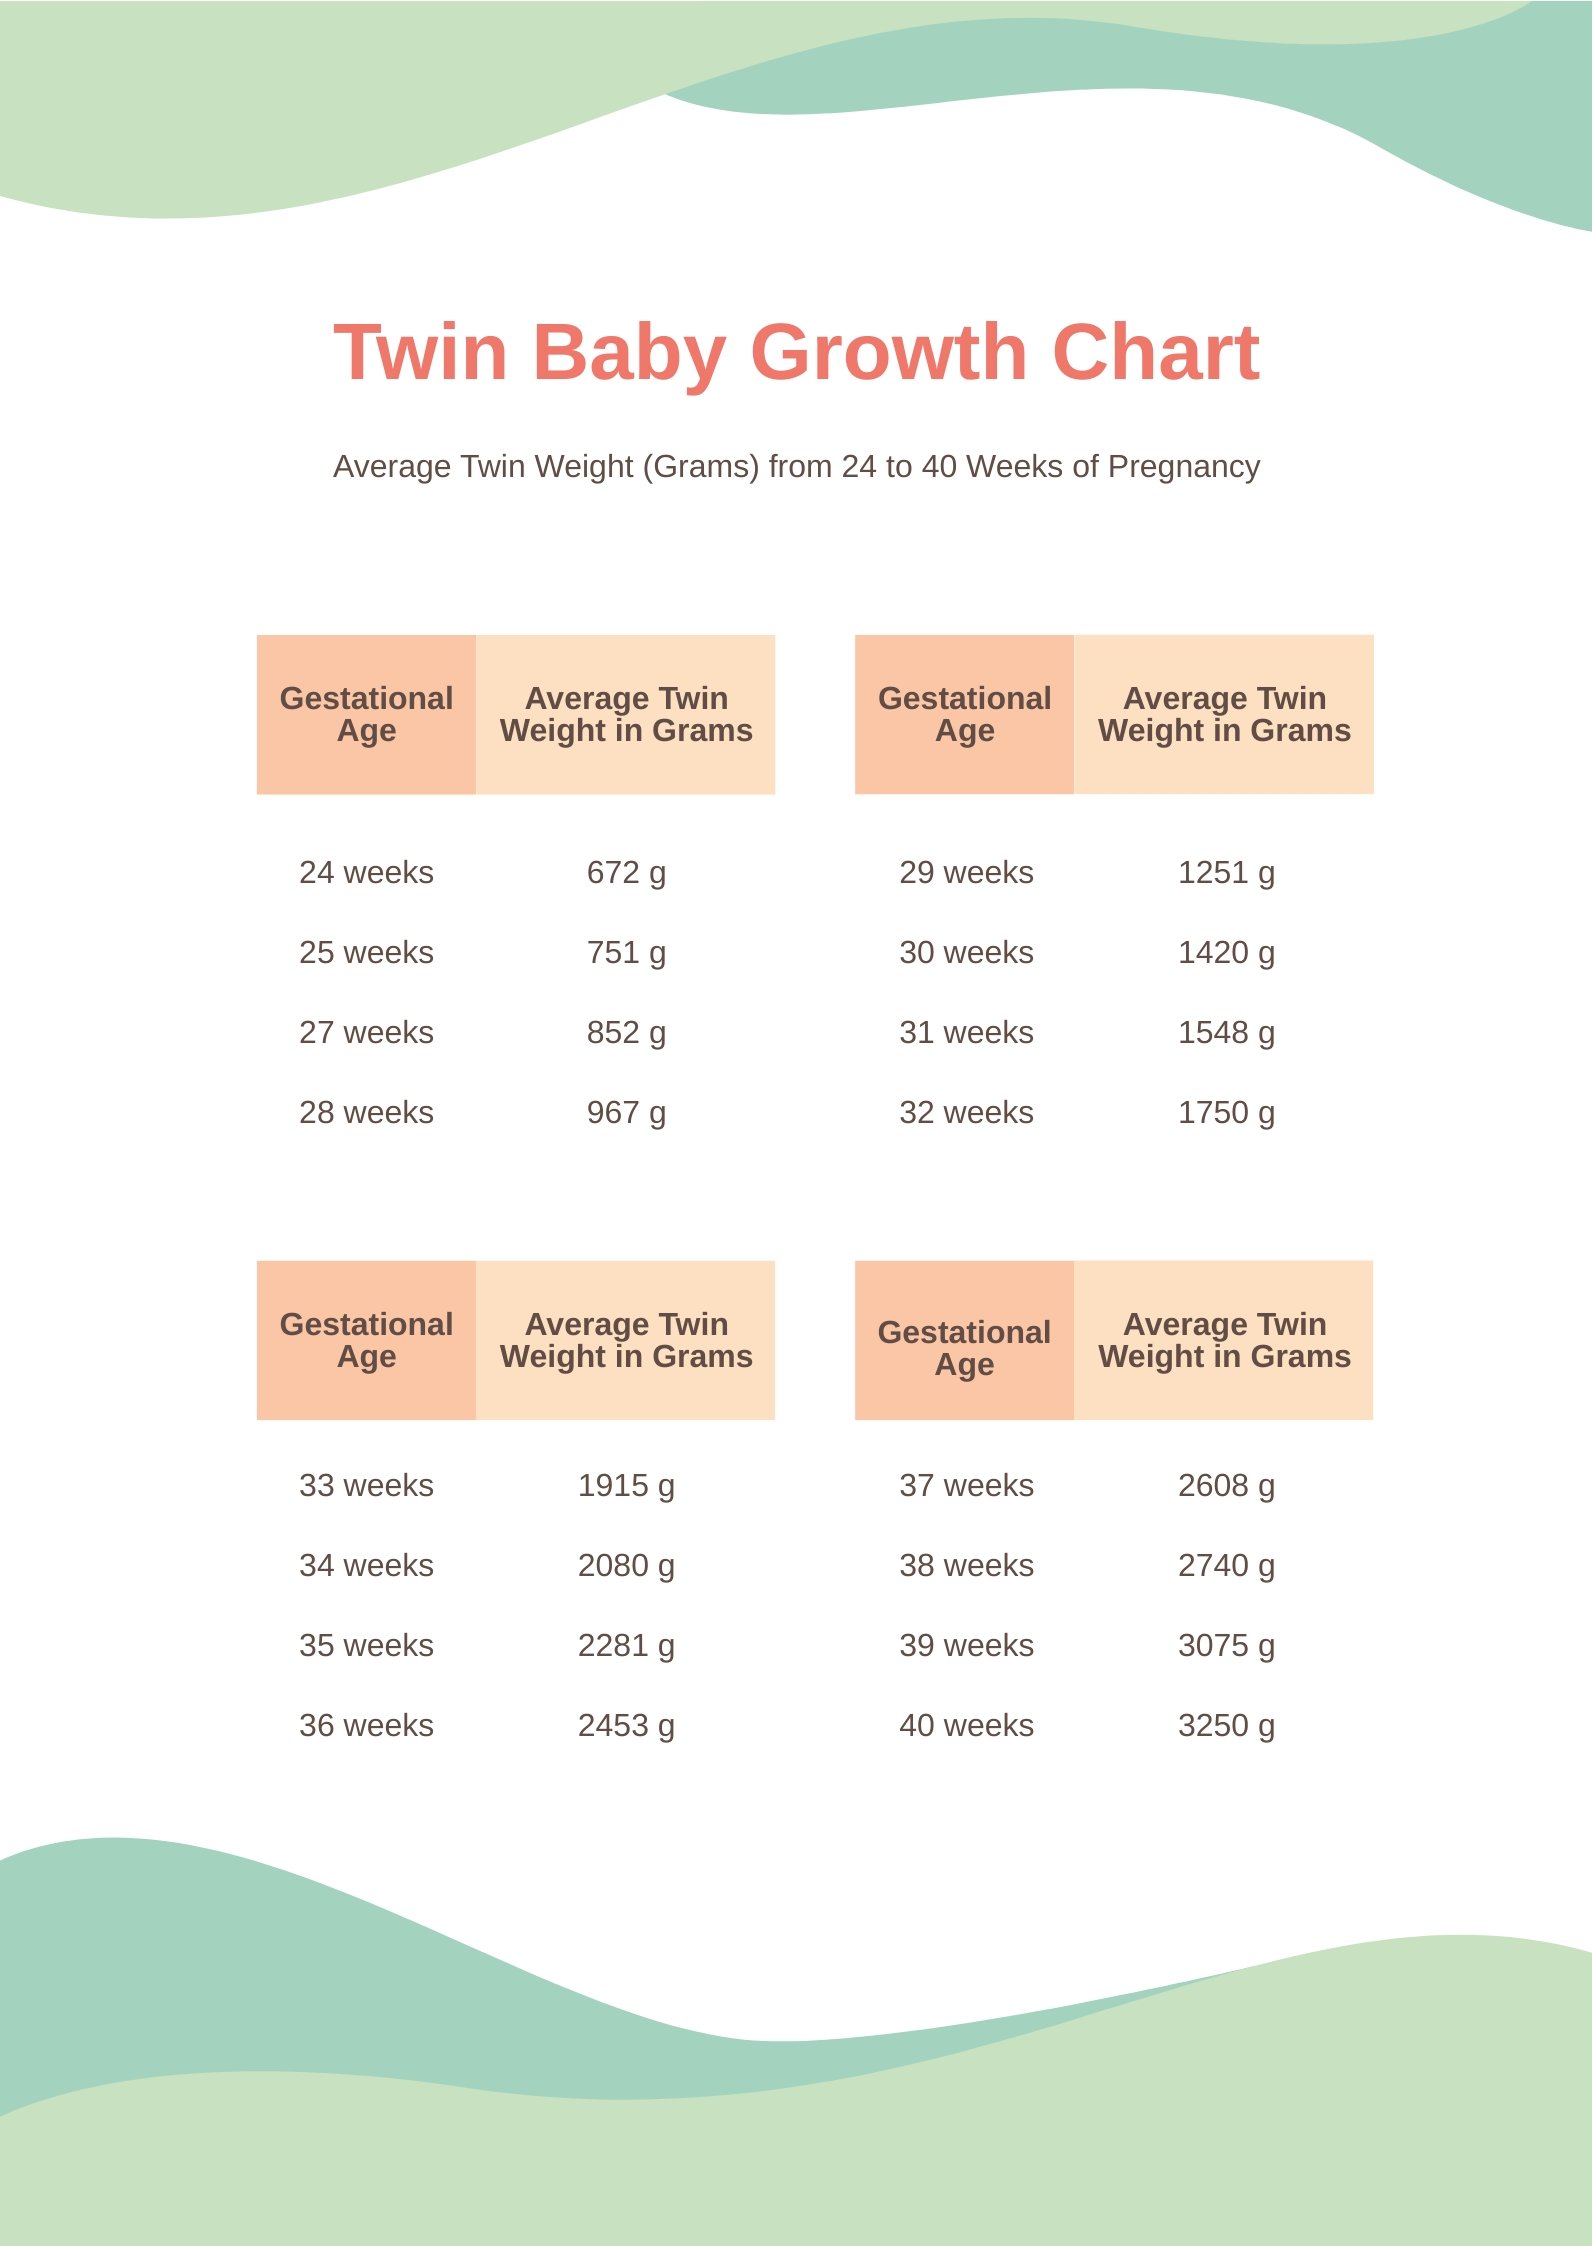 Twin Baby Growth Chart in PDF